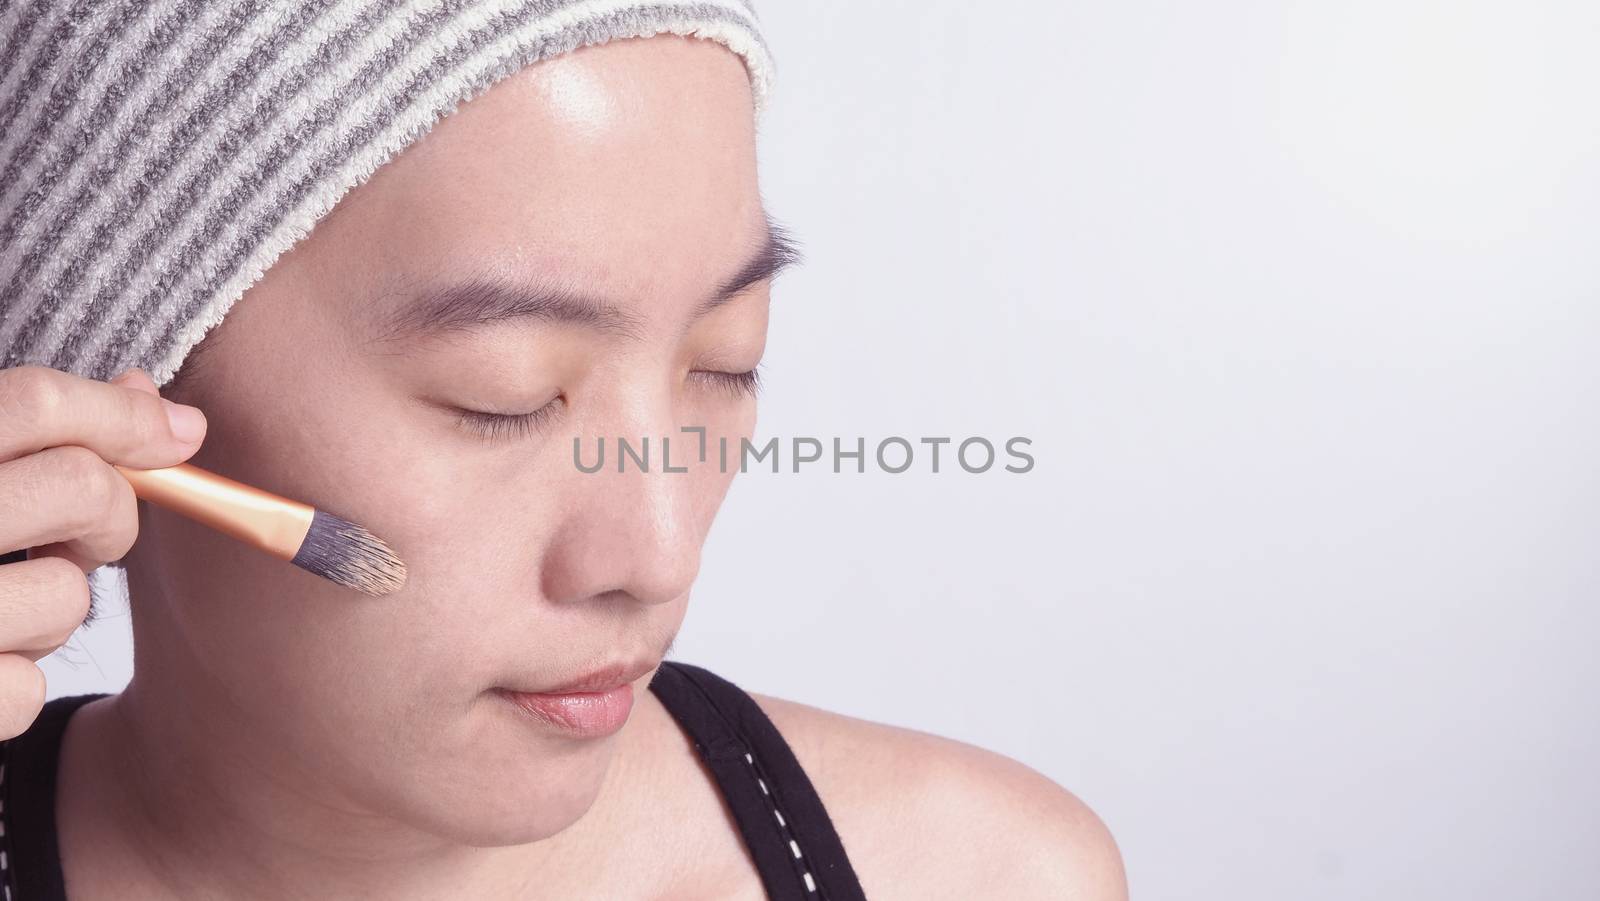 Asian girl or woman 40 years old beautiful face with japanese look making up by foundation liquid and cosmetic brush on sensitive skin for helping her complexion look flawless and real no retouch